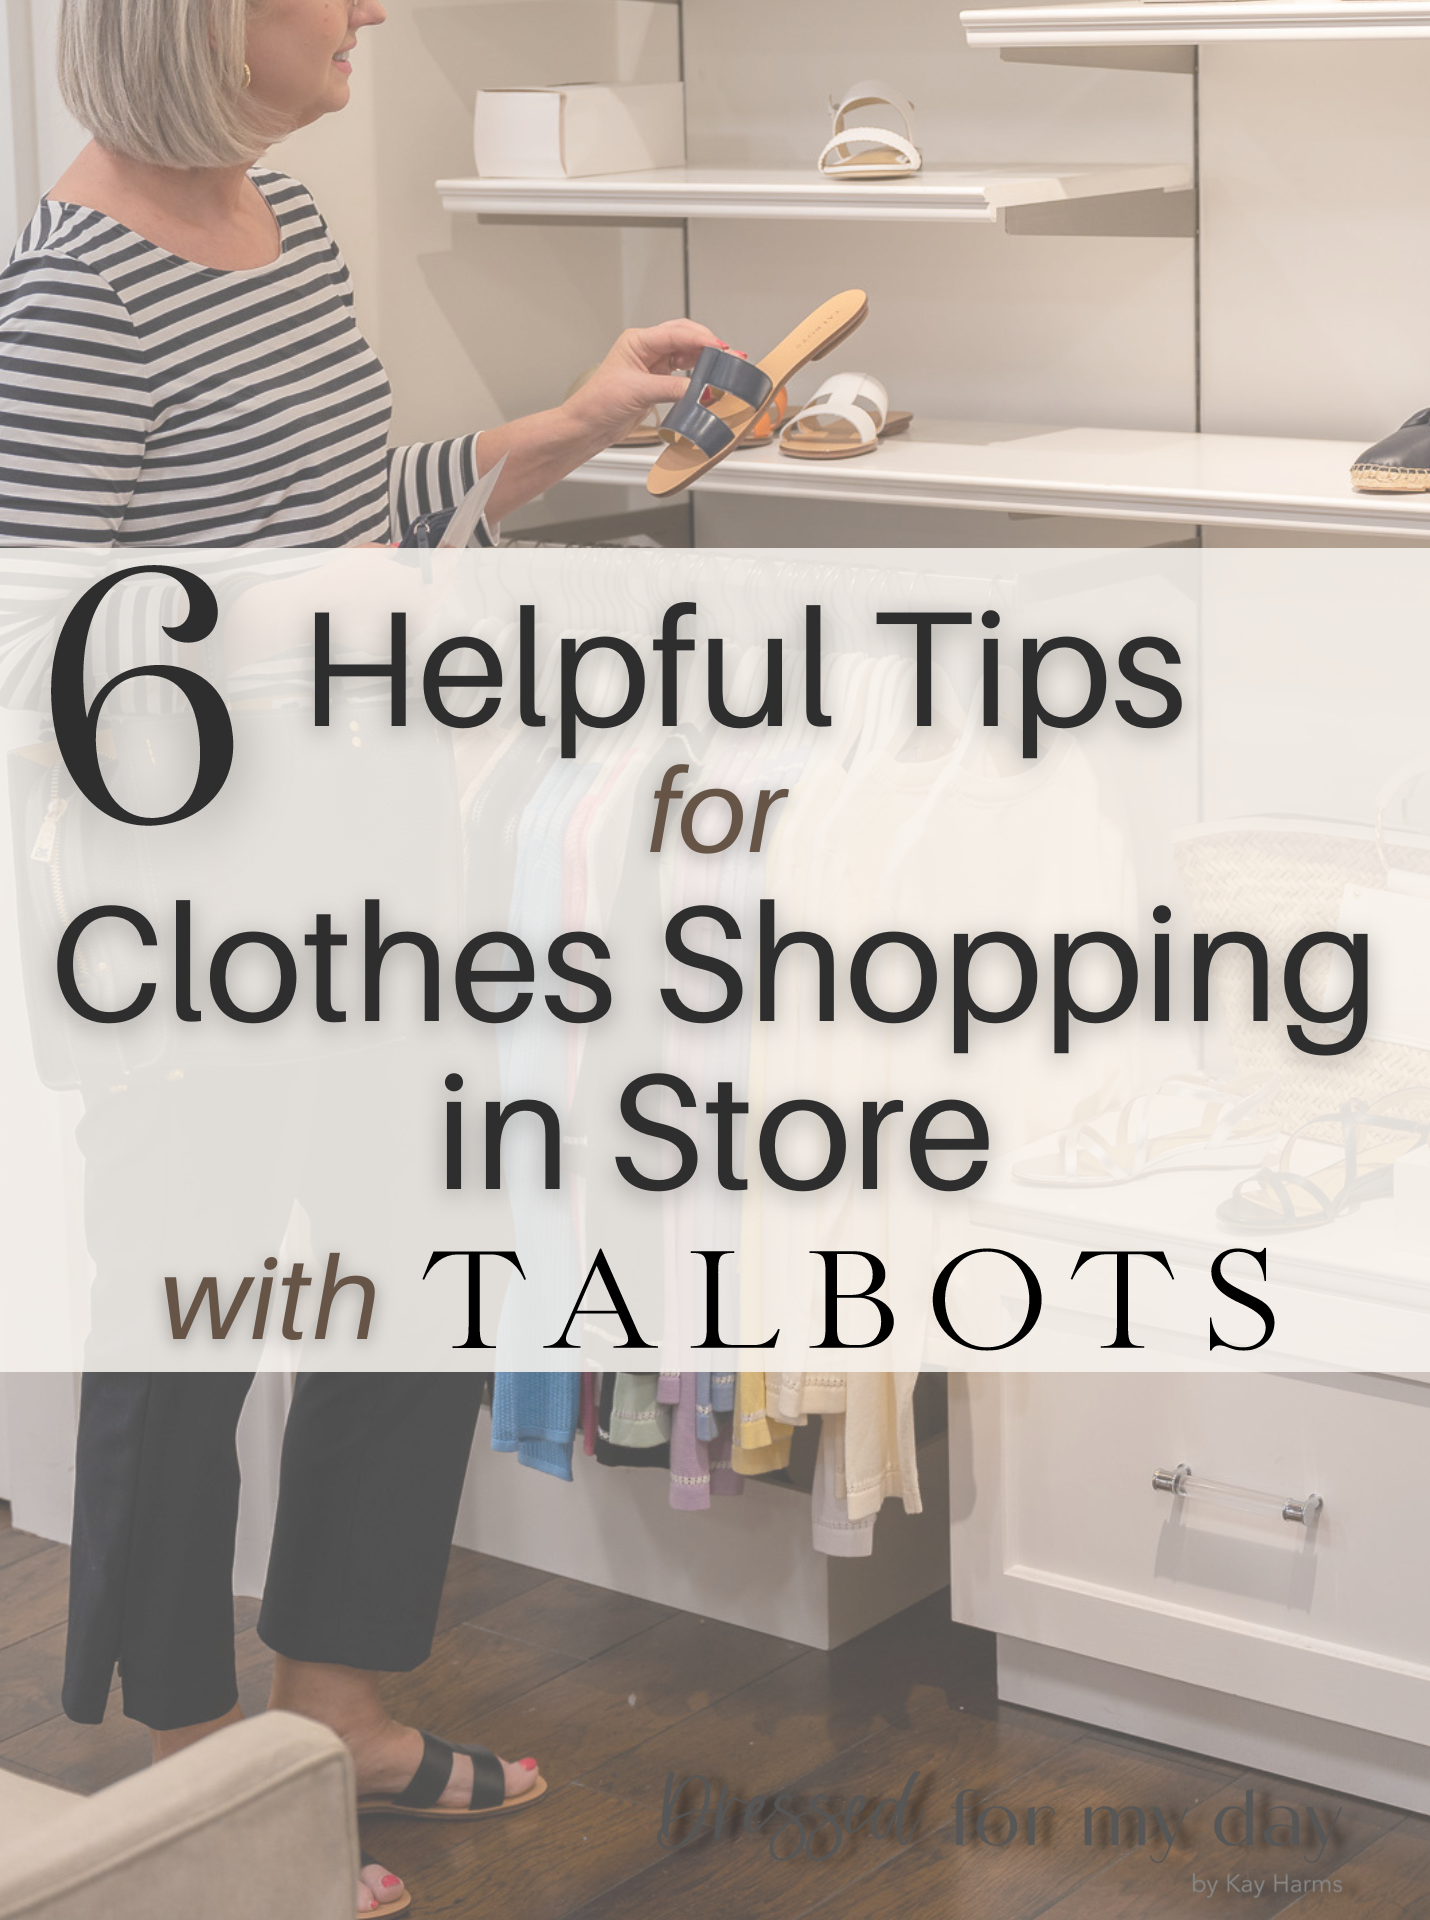 6 Helpful Tips for Clothes Shopping In Store with Talbots